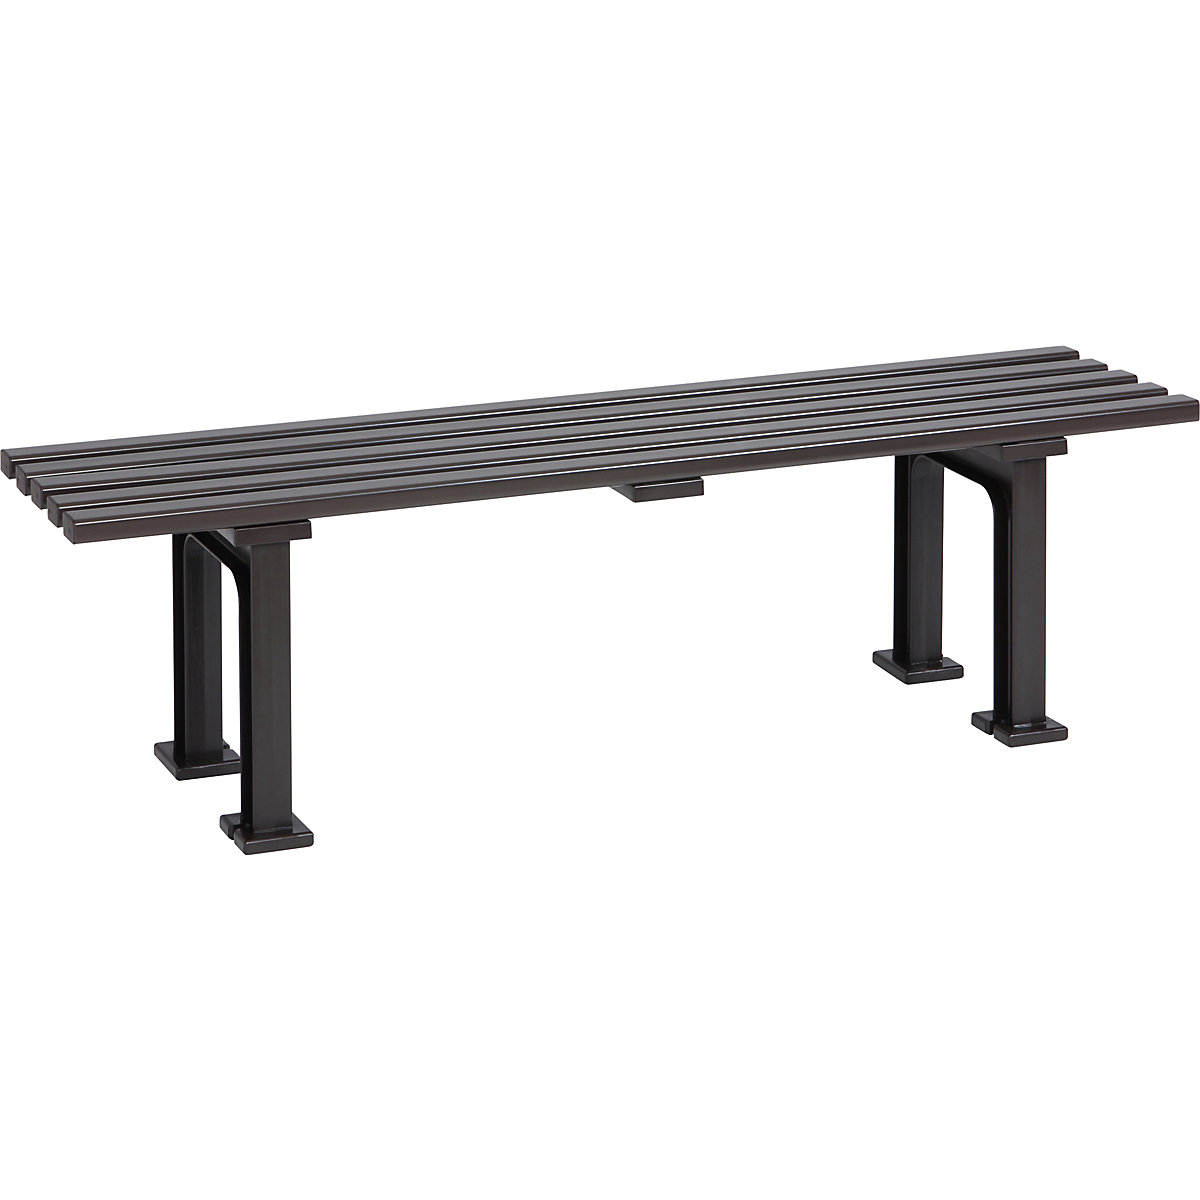 Seating bench without backrest